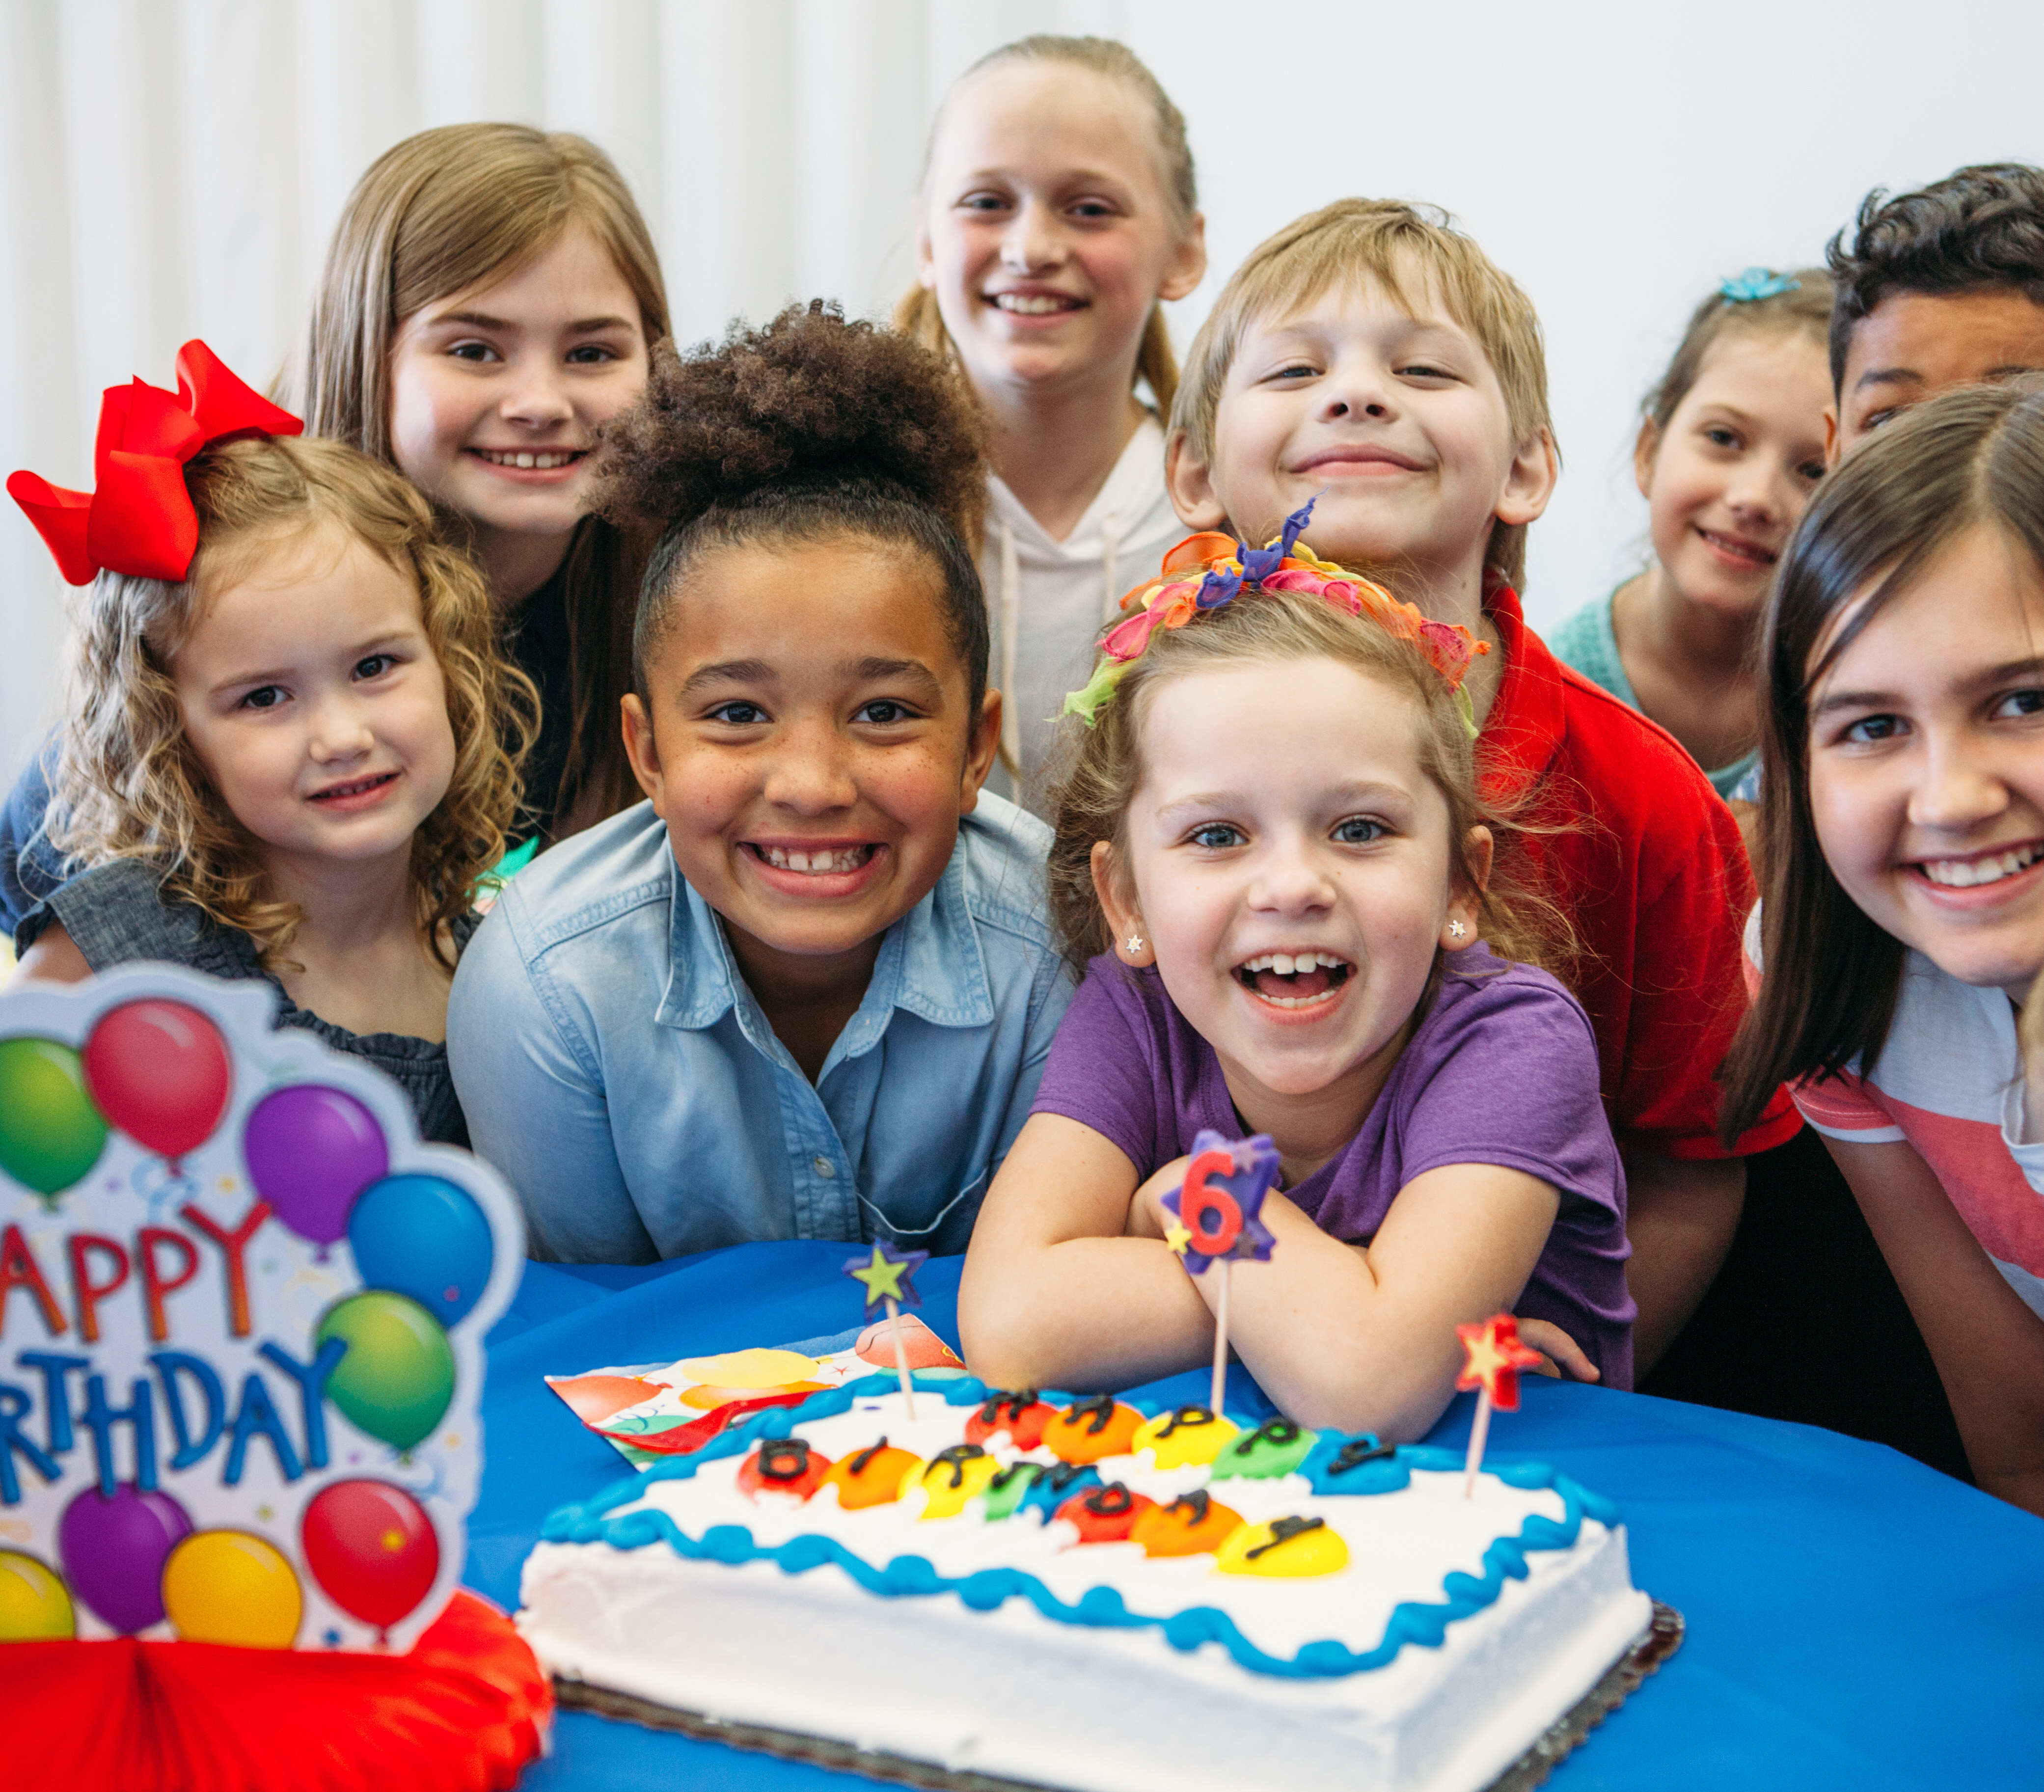 kids birthday party pictures